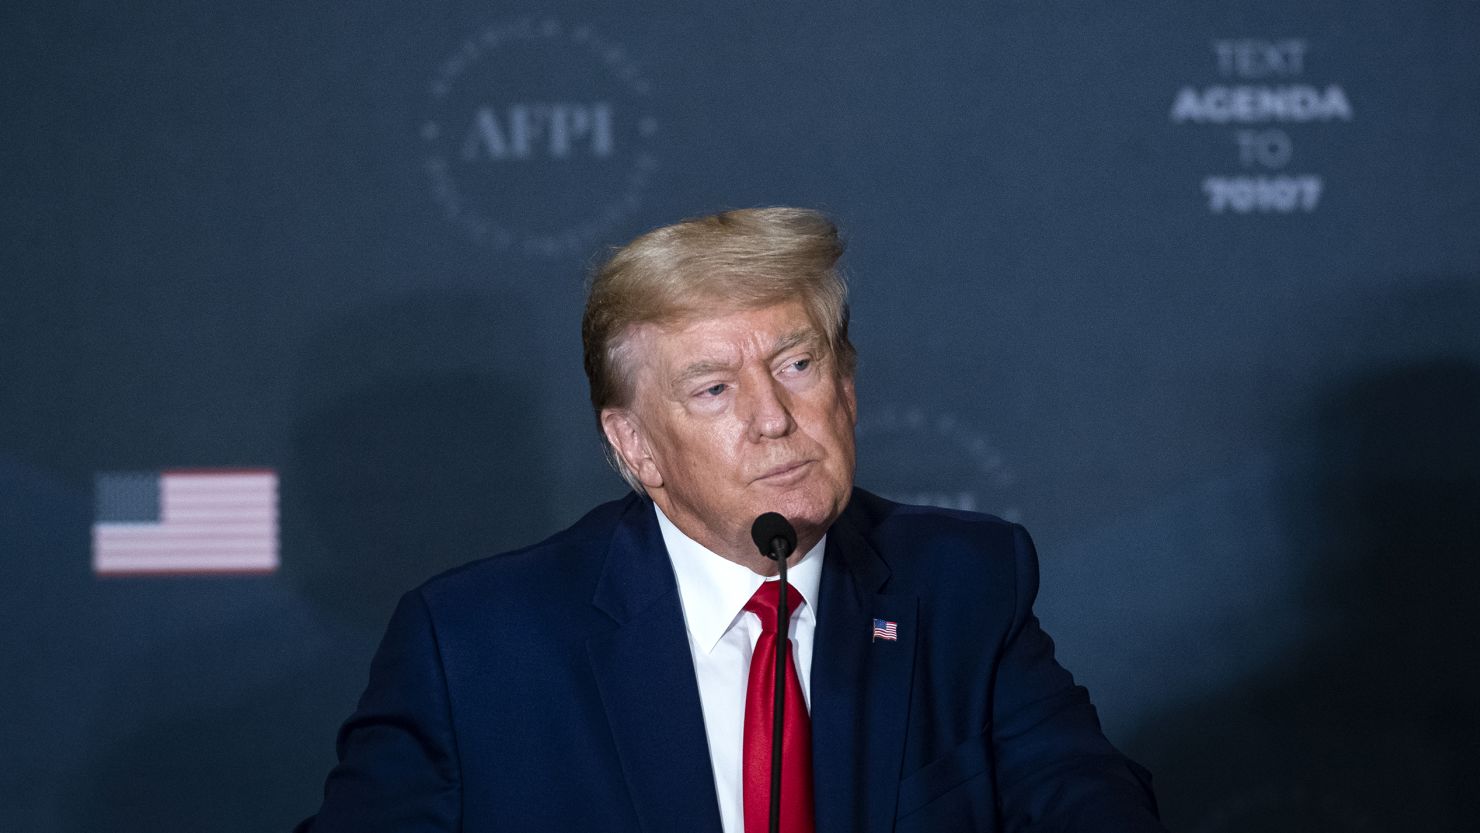 Former President Donald Trump speaks at an America First Policy Institute summit in Washington, DC, on July 26, 2022.